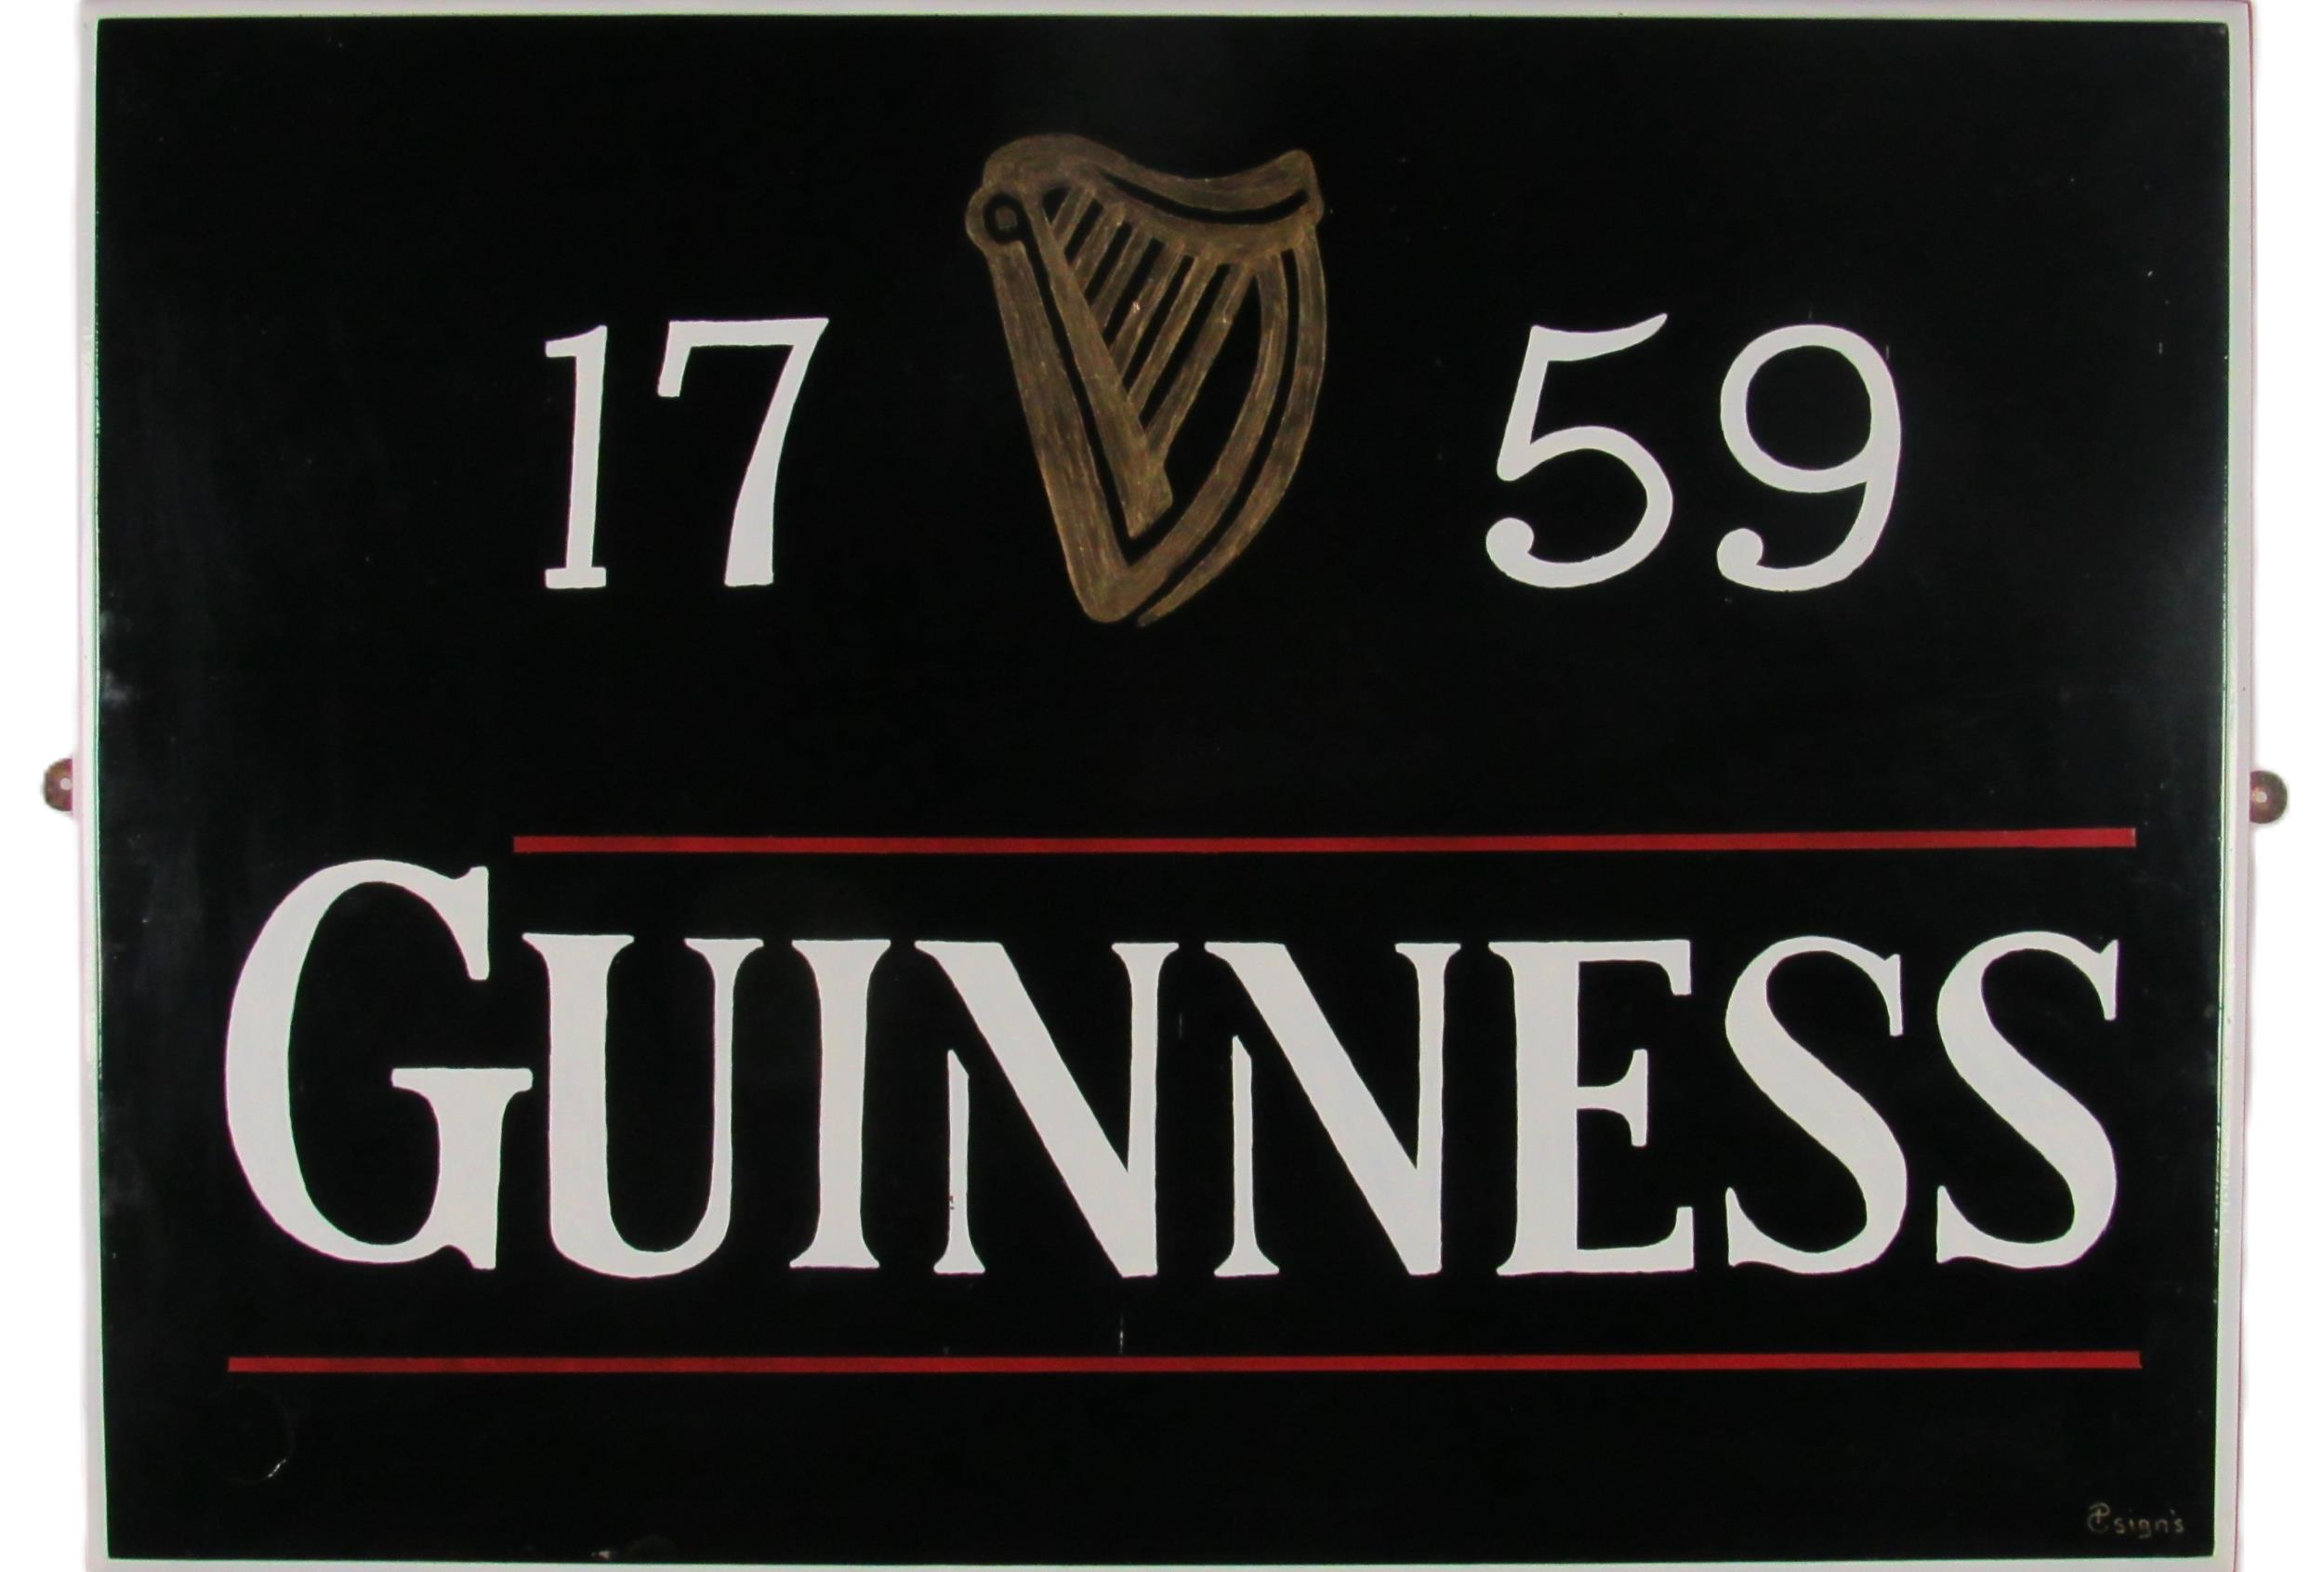 An original hand painted and varnished Advertisement Panel Sign, for 'Guinness - 1759,' decorated on